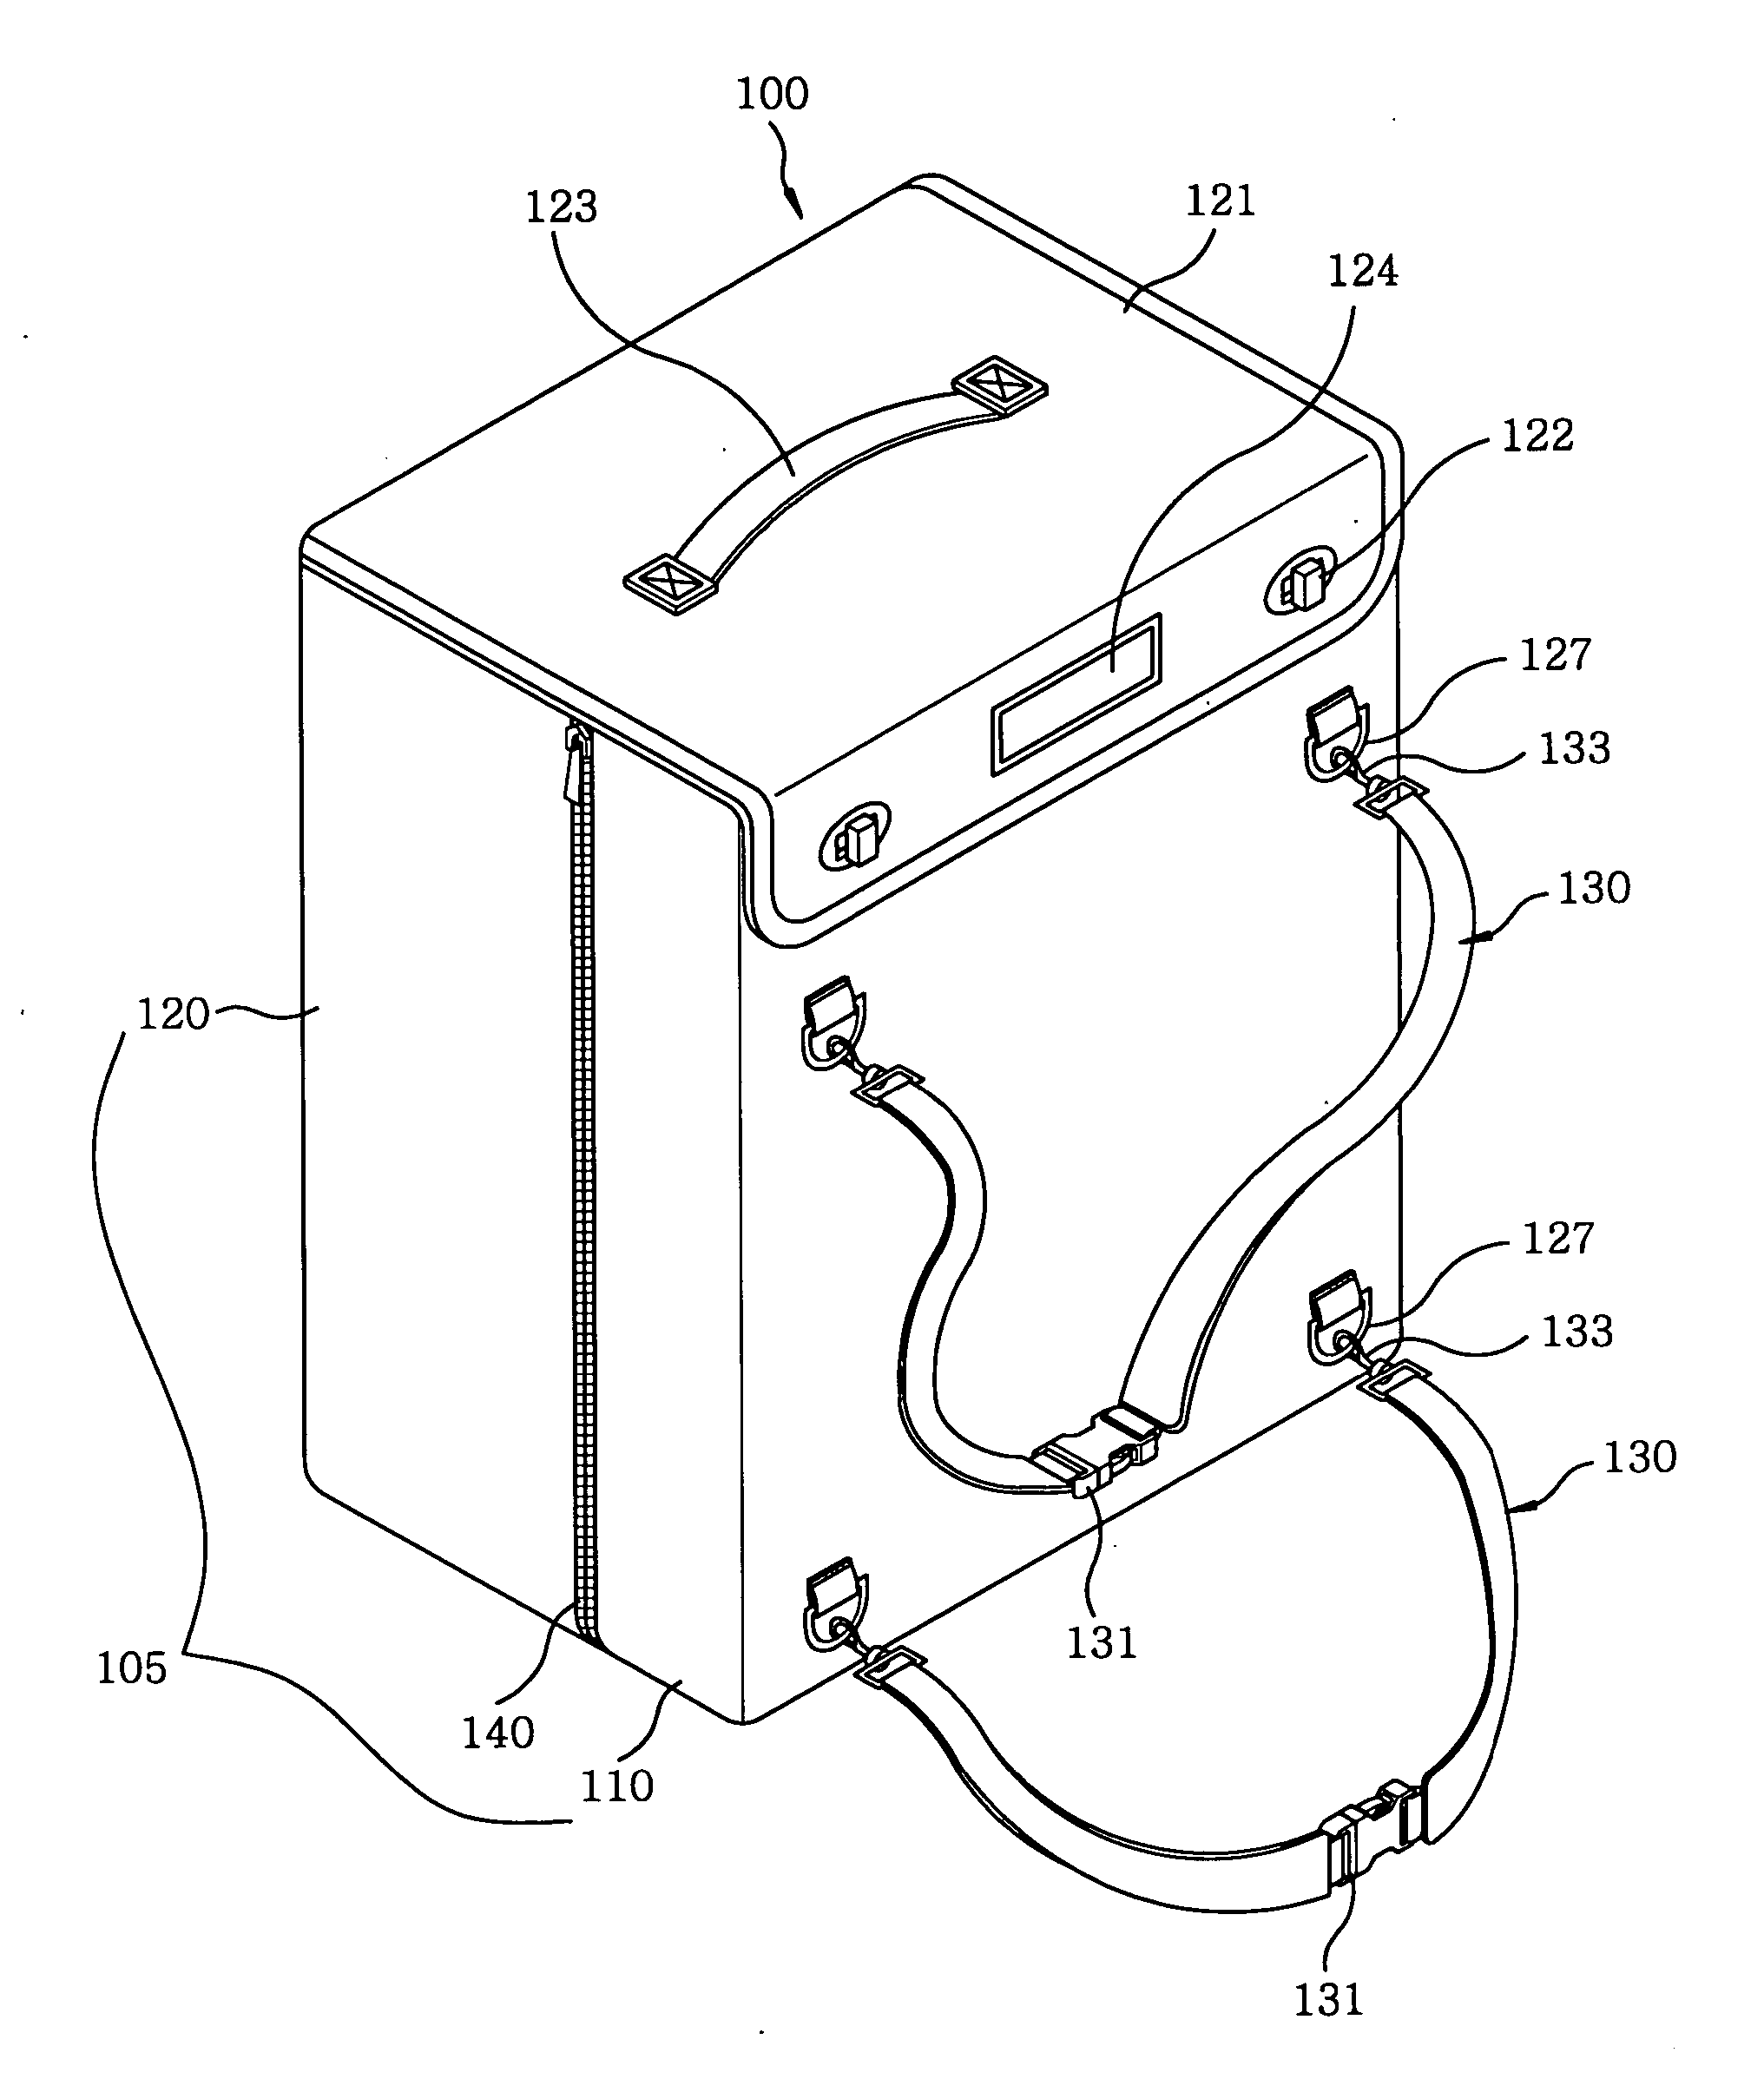 Case for carrying and mounting an image system in a car